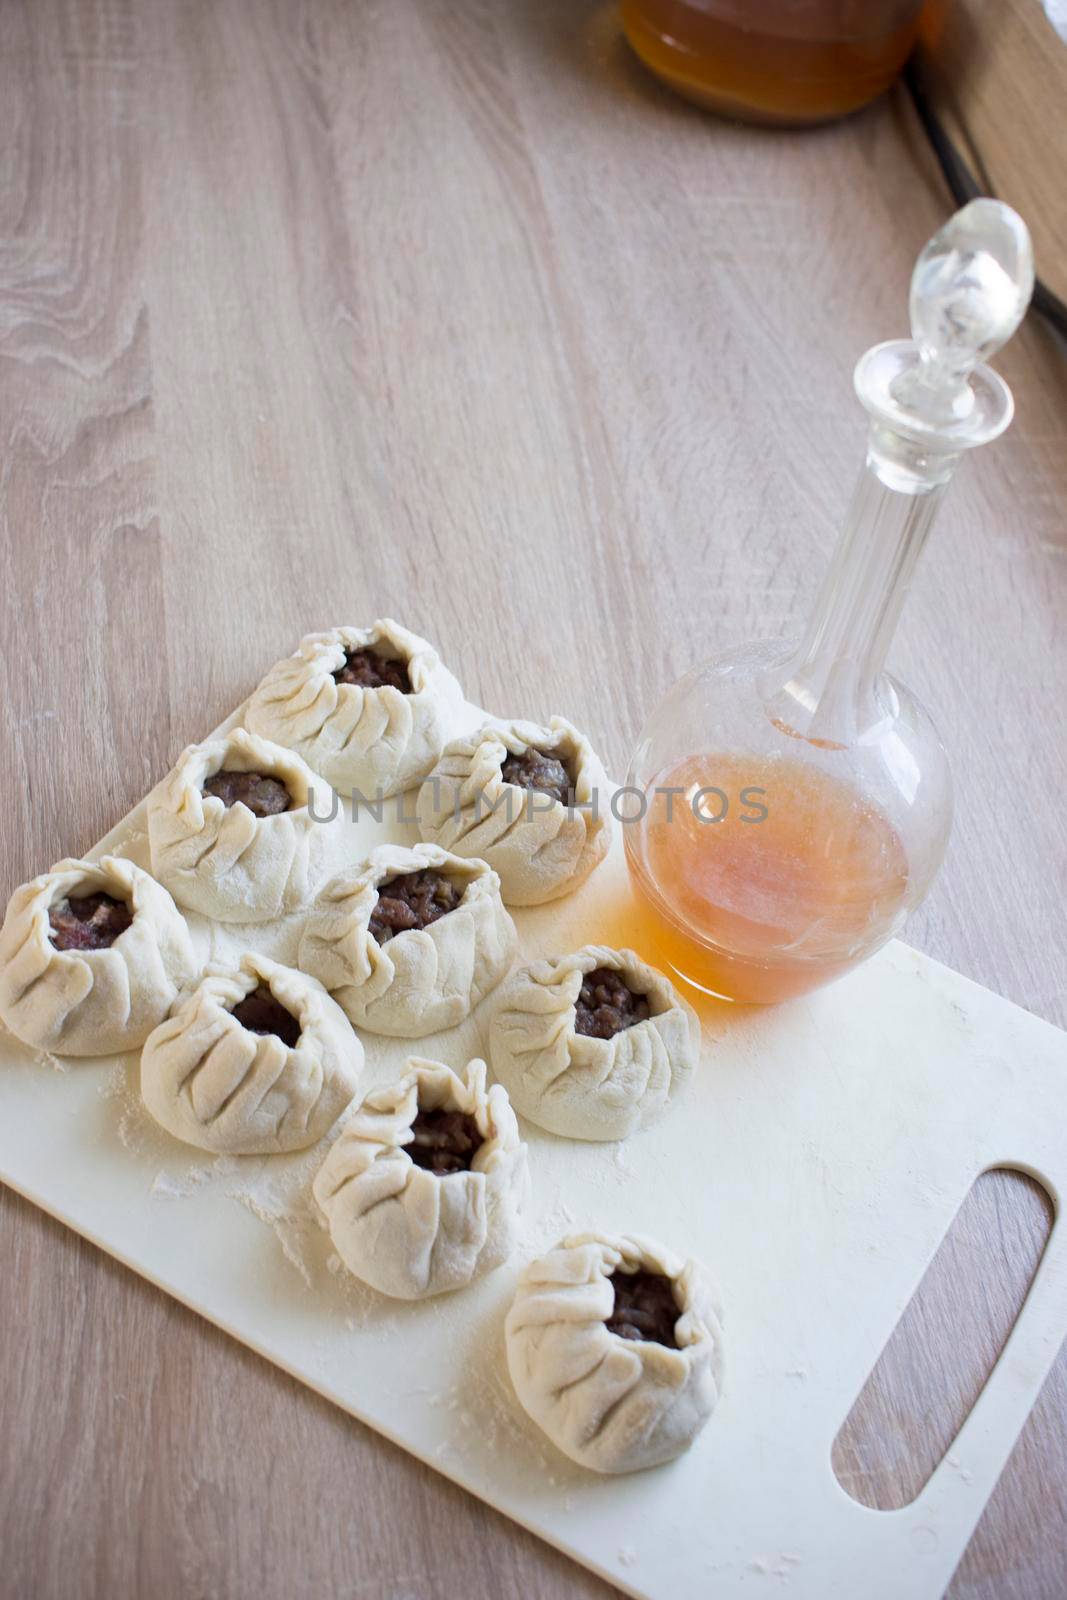 Manti also manty, mantu, or manta is a type of dumpling popular in most Turkic cuisines, as well as in the cuisines of the South Caucasus, Central Asia more broadly, Afghanistan, and Chinese Muslims.